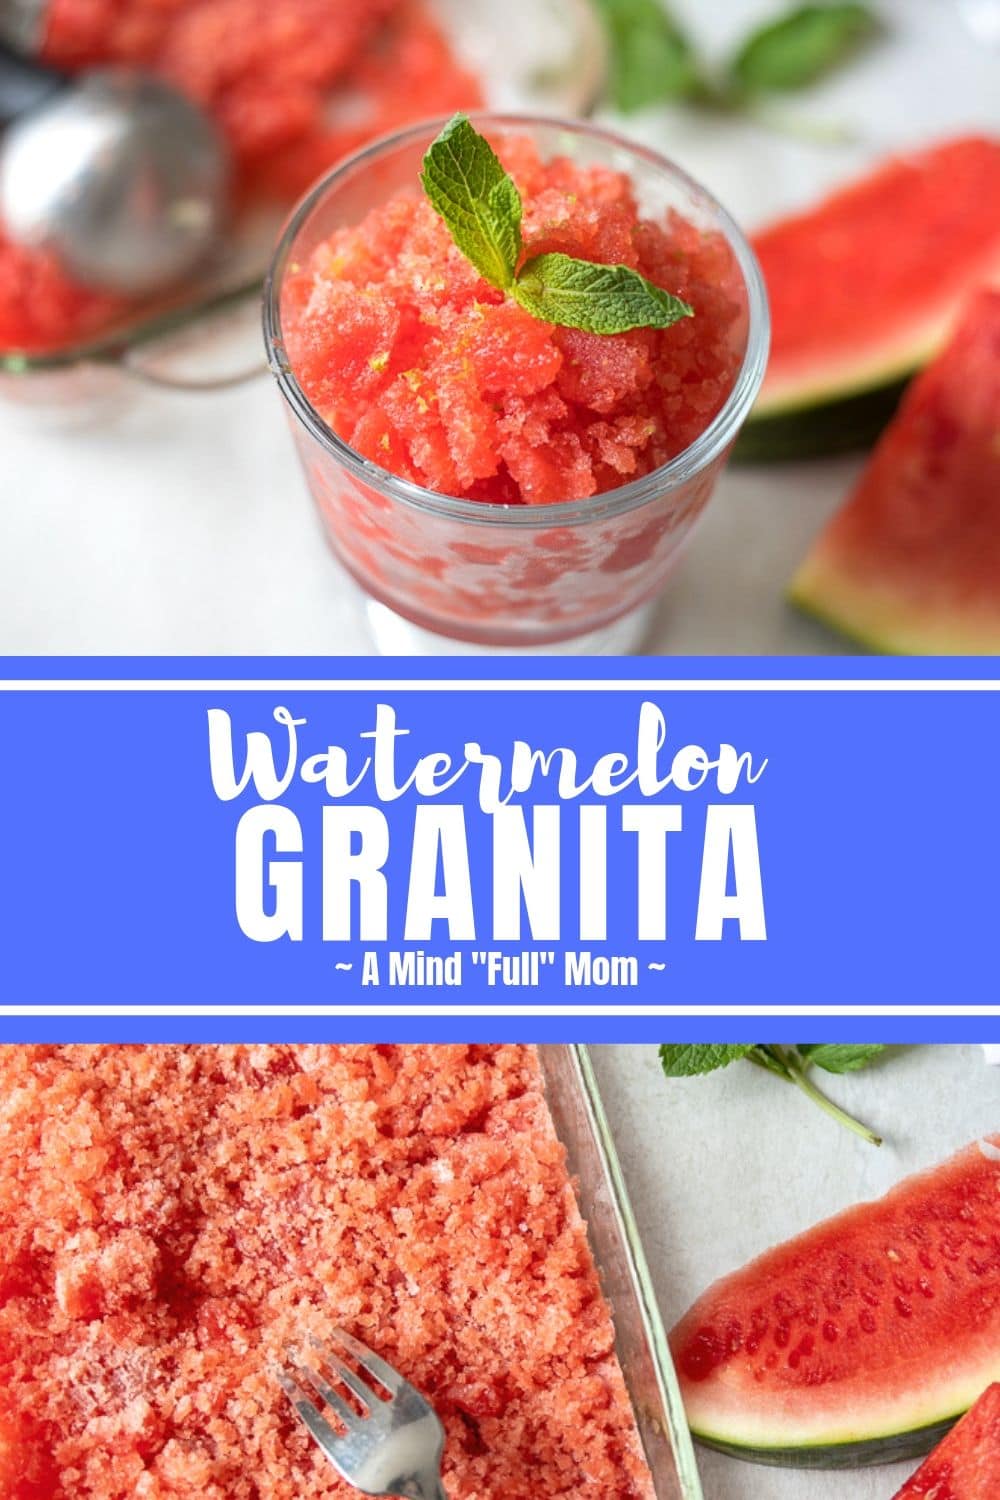 Watermelon Granitas are just what a hot summer day begs for! These refreshing homemade grantias are made with fresh watermelon and lime juice and finished with a  mint lime sugar that takes this simple frozen dessert over the top! #frozendessert #dessert #glutenfreedessert #watermelon #granita